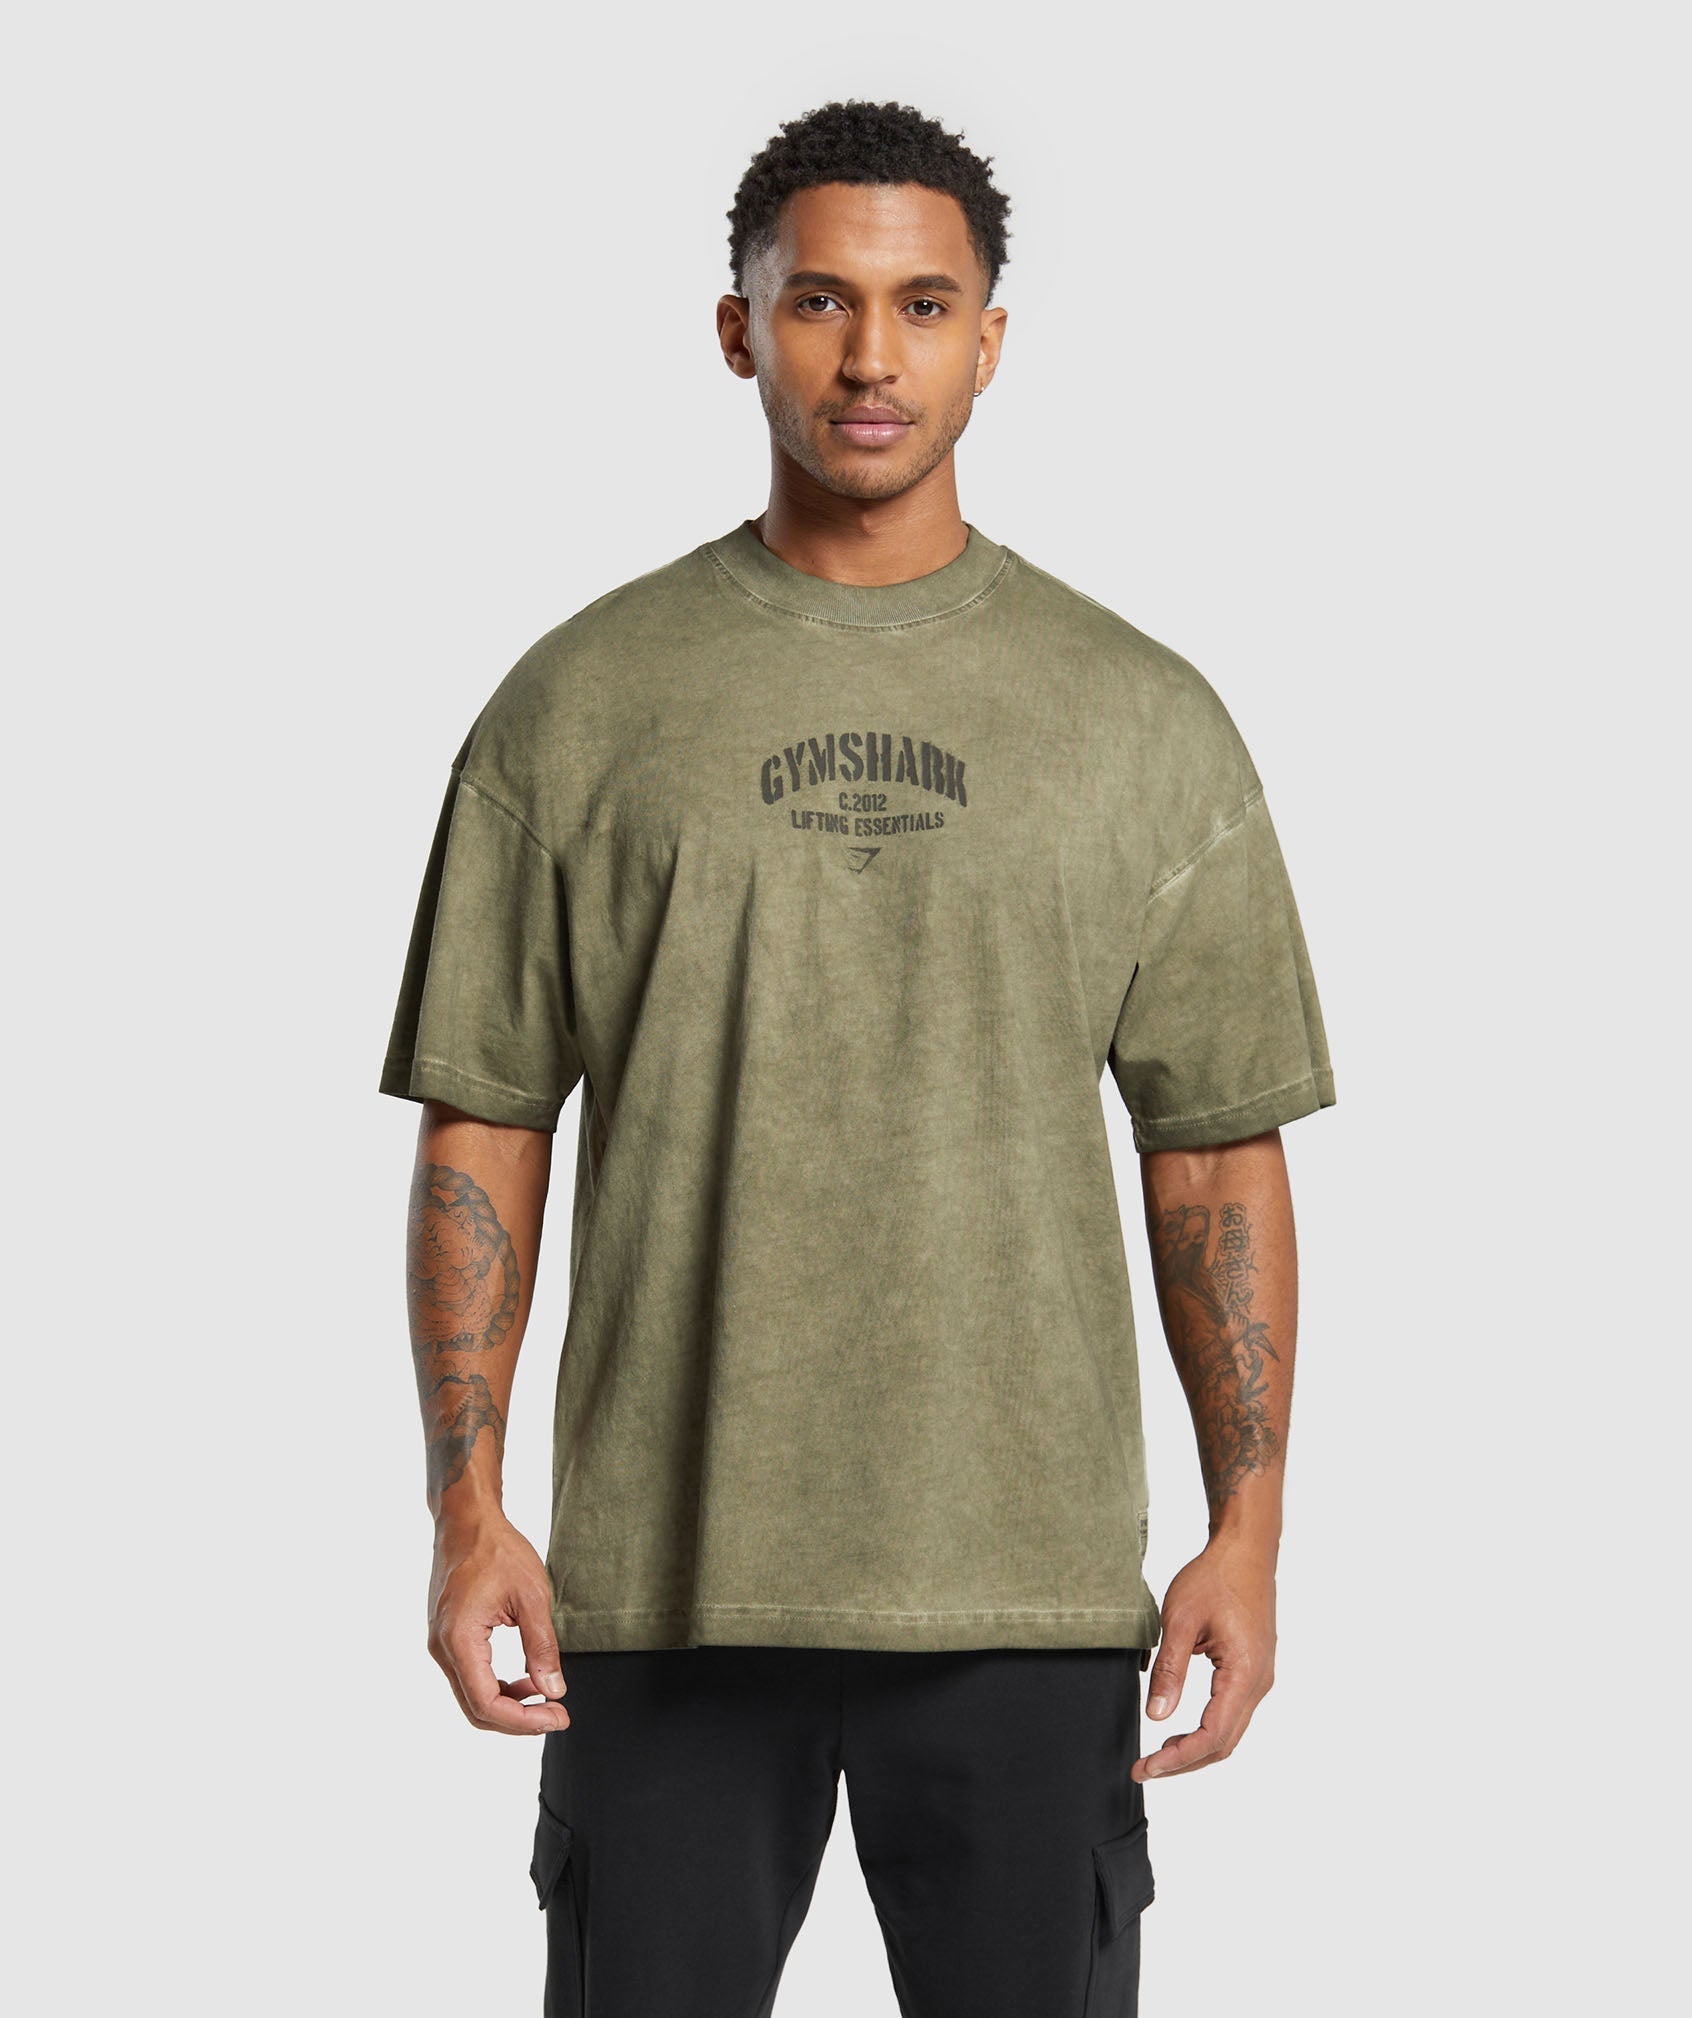 Heavyweight Washed T-Shirt in Utility Green - view 2